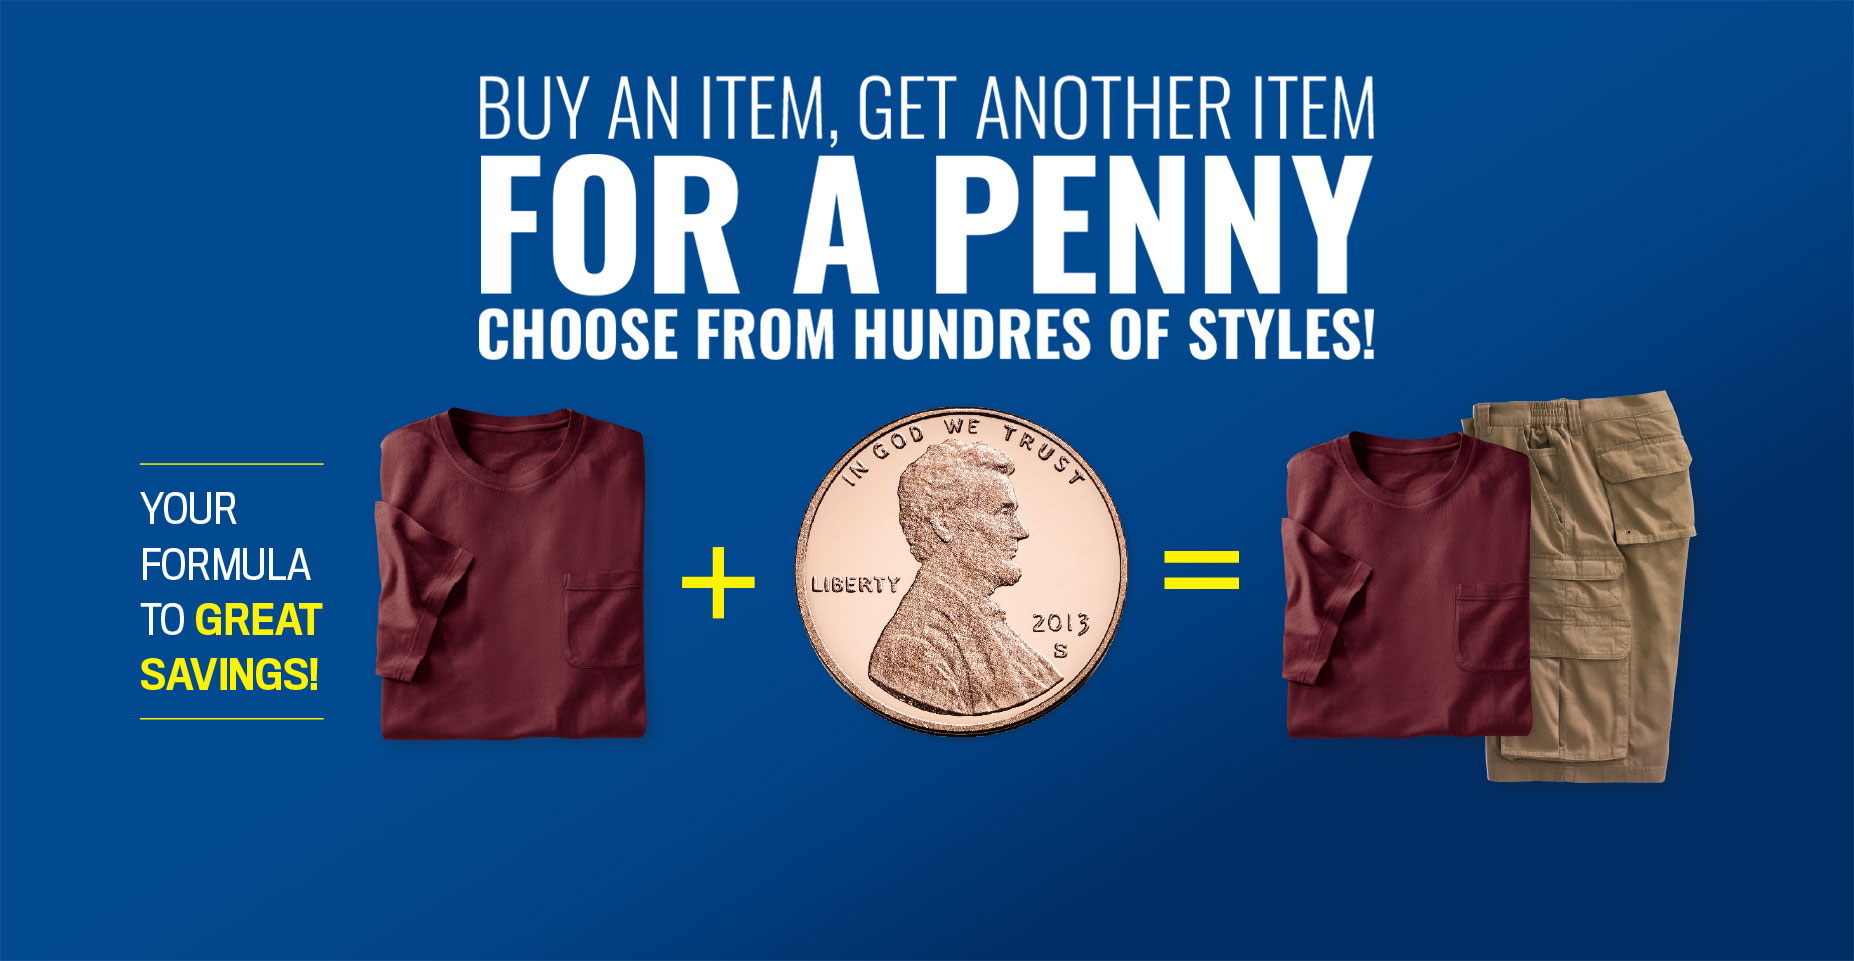 Buy an item, get another item for a penny choose from hundreds of styles